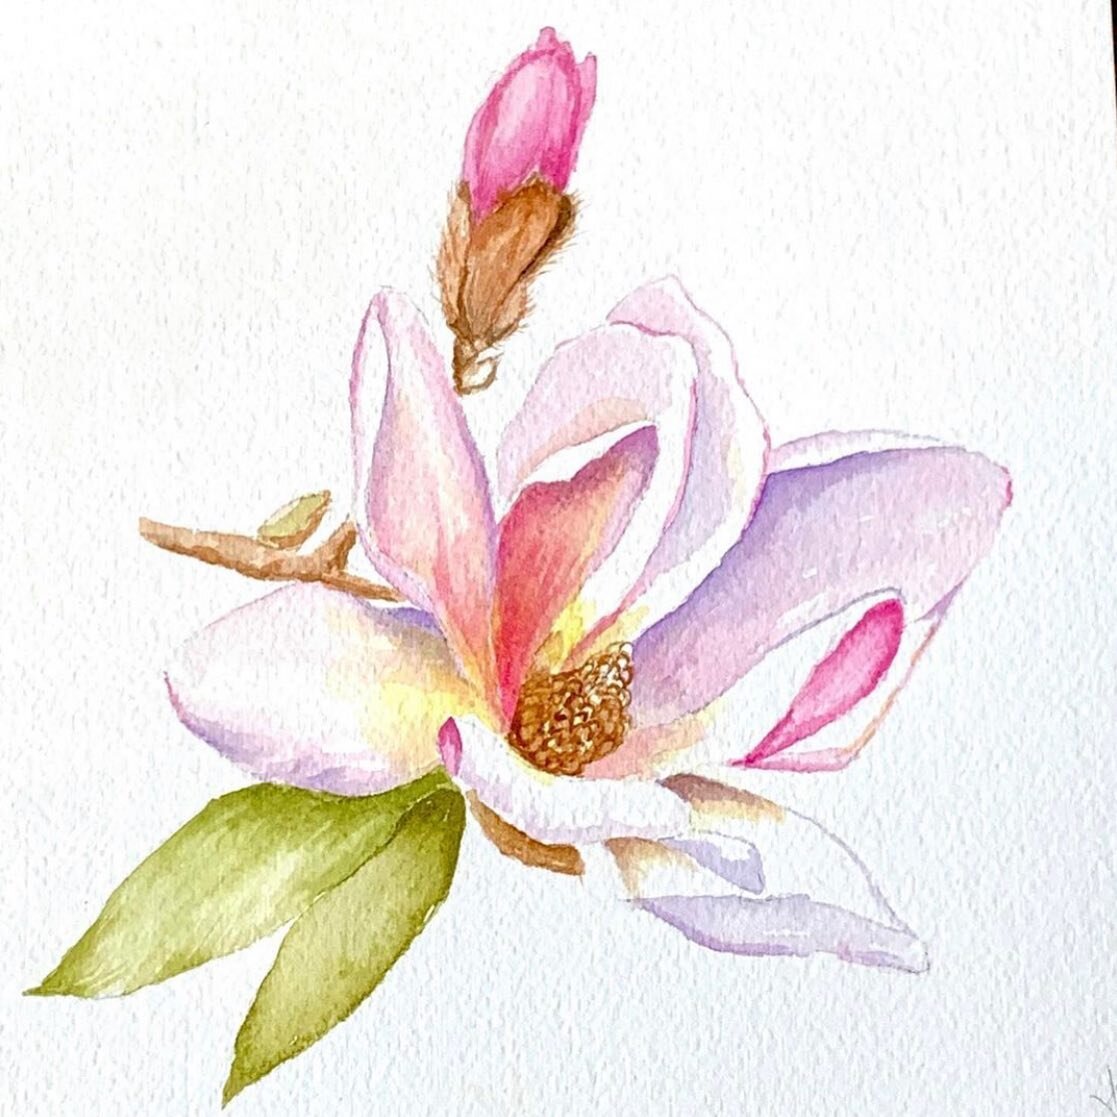 🌸So which type of magnolia would you use to illustrate a &ldquo;Steel Magnolia?&rdquo; There are several different types: lily, saucer, southern - just to name a few! What I&rsquo;ve painted here is a lily variety. . . 🤔But I do wonder (being a yan